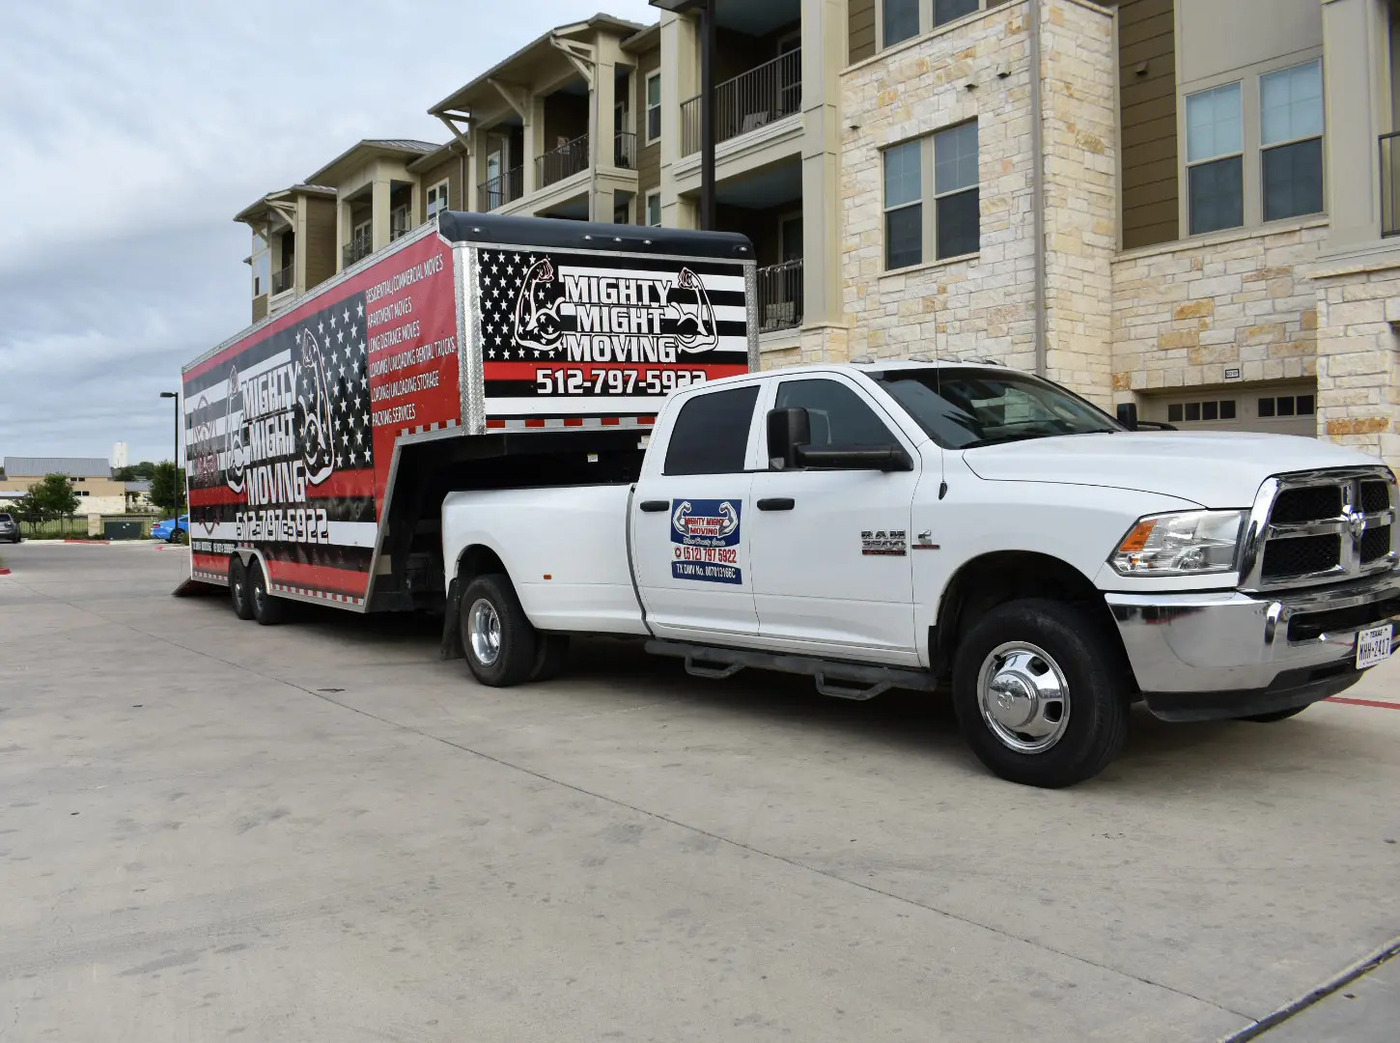 Mighty Might Moving, Movers in Hutto TX